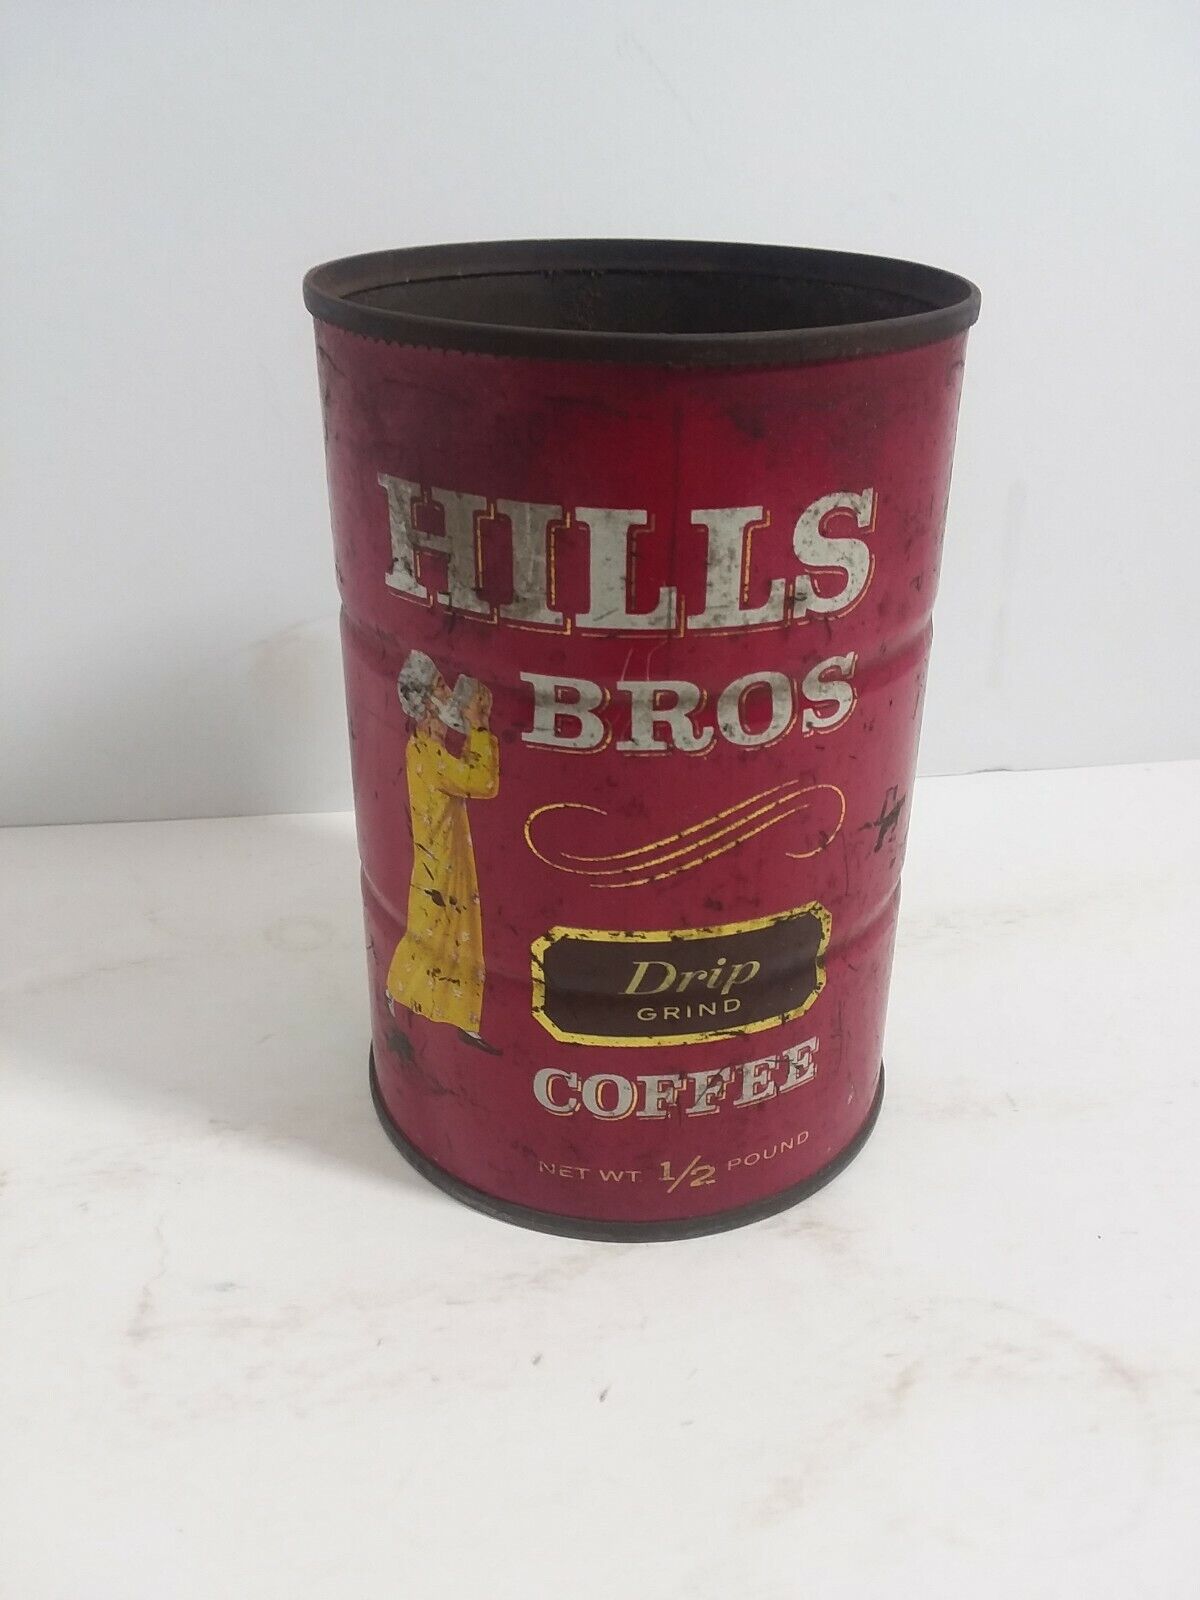 Hills Bros Drip Grind 1/2 Pound Coffee Can no cover  dirty has scratches 